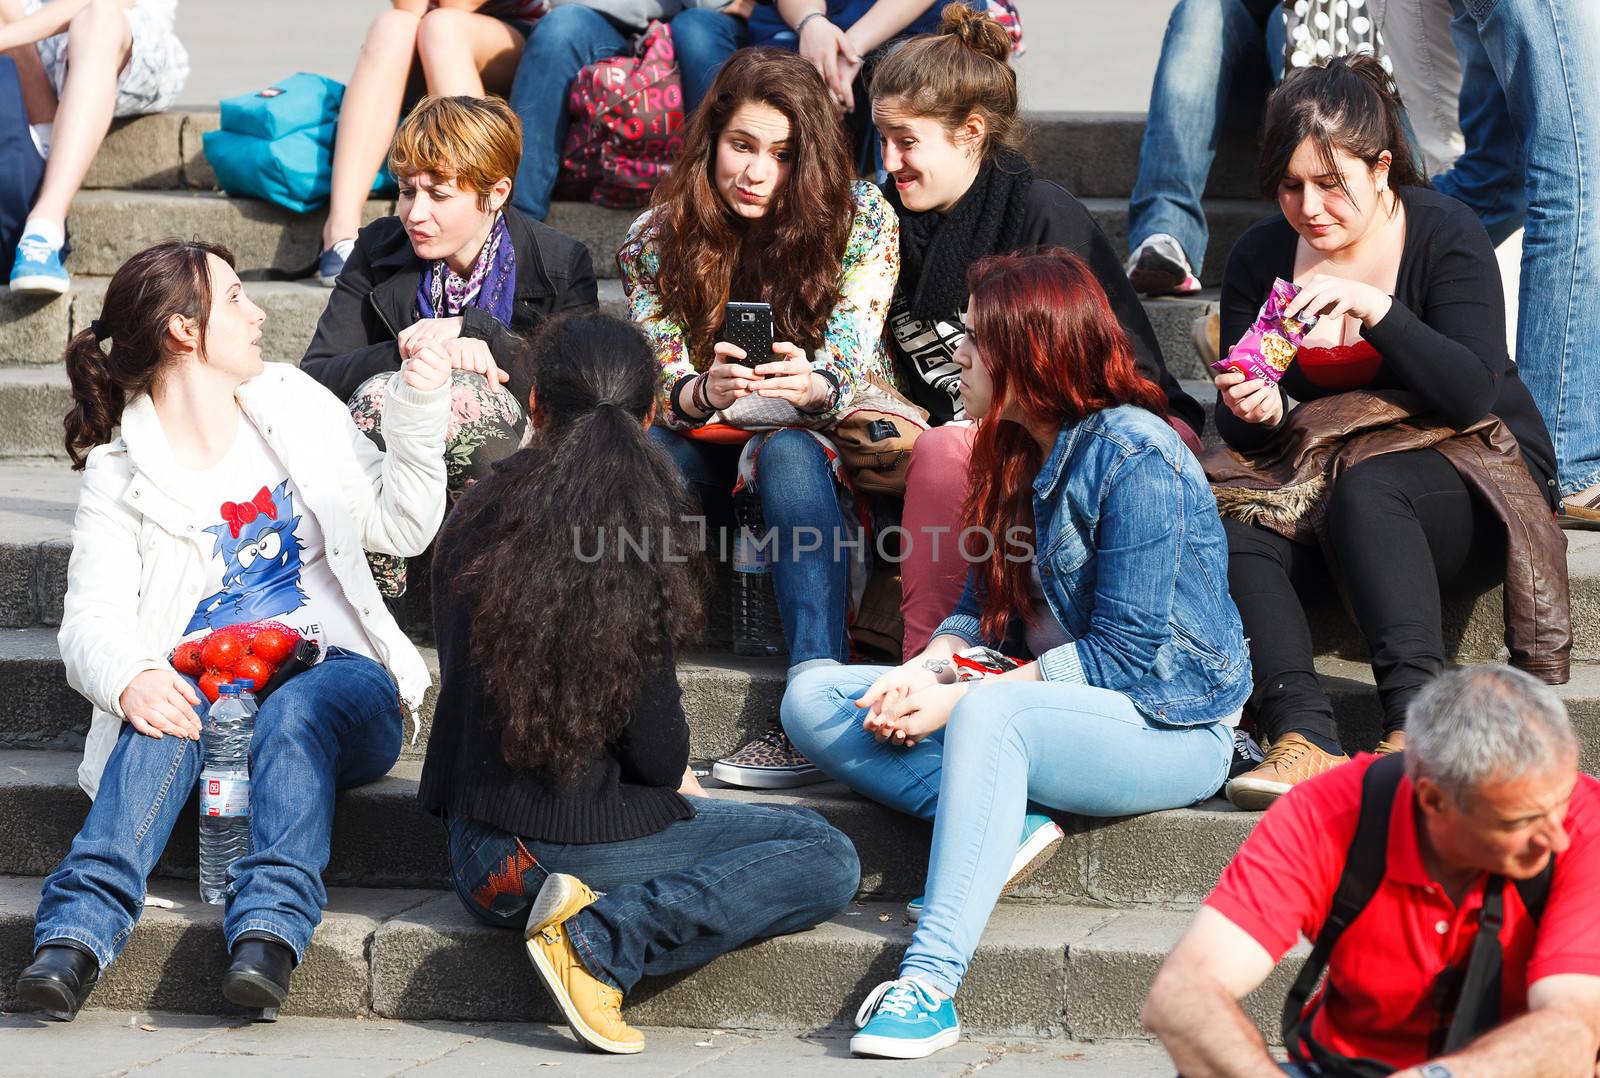 BARCELONA, SPAIN - APR 16: Company of young girls sitting on steps of Barcelona Cathedral. April 16, 2013 in Barcelona, Spain. This Cathedral, is the seat of the Archbishop of Barcelona